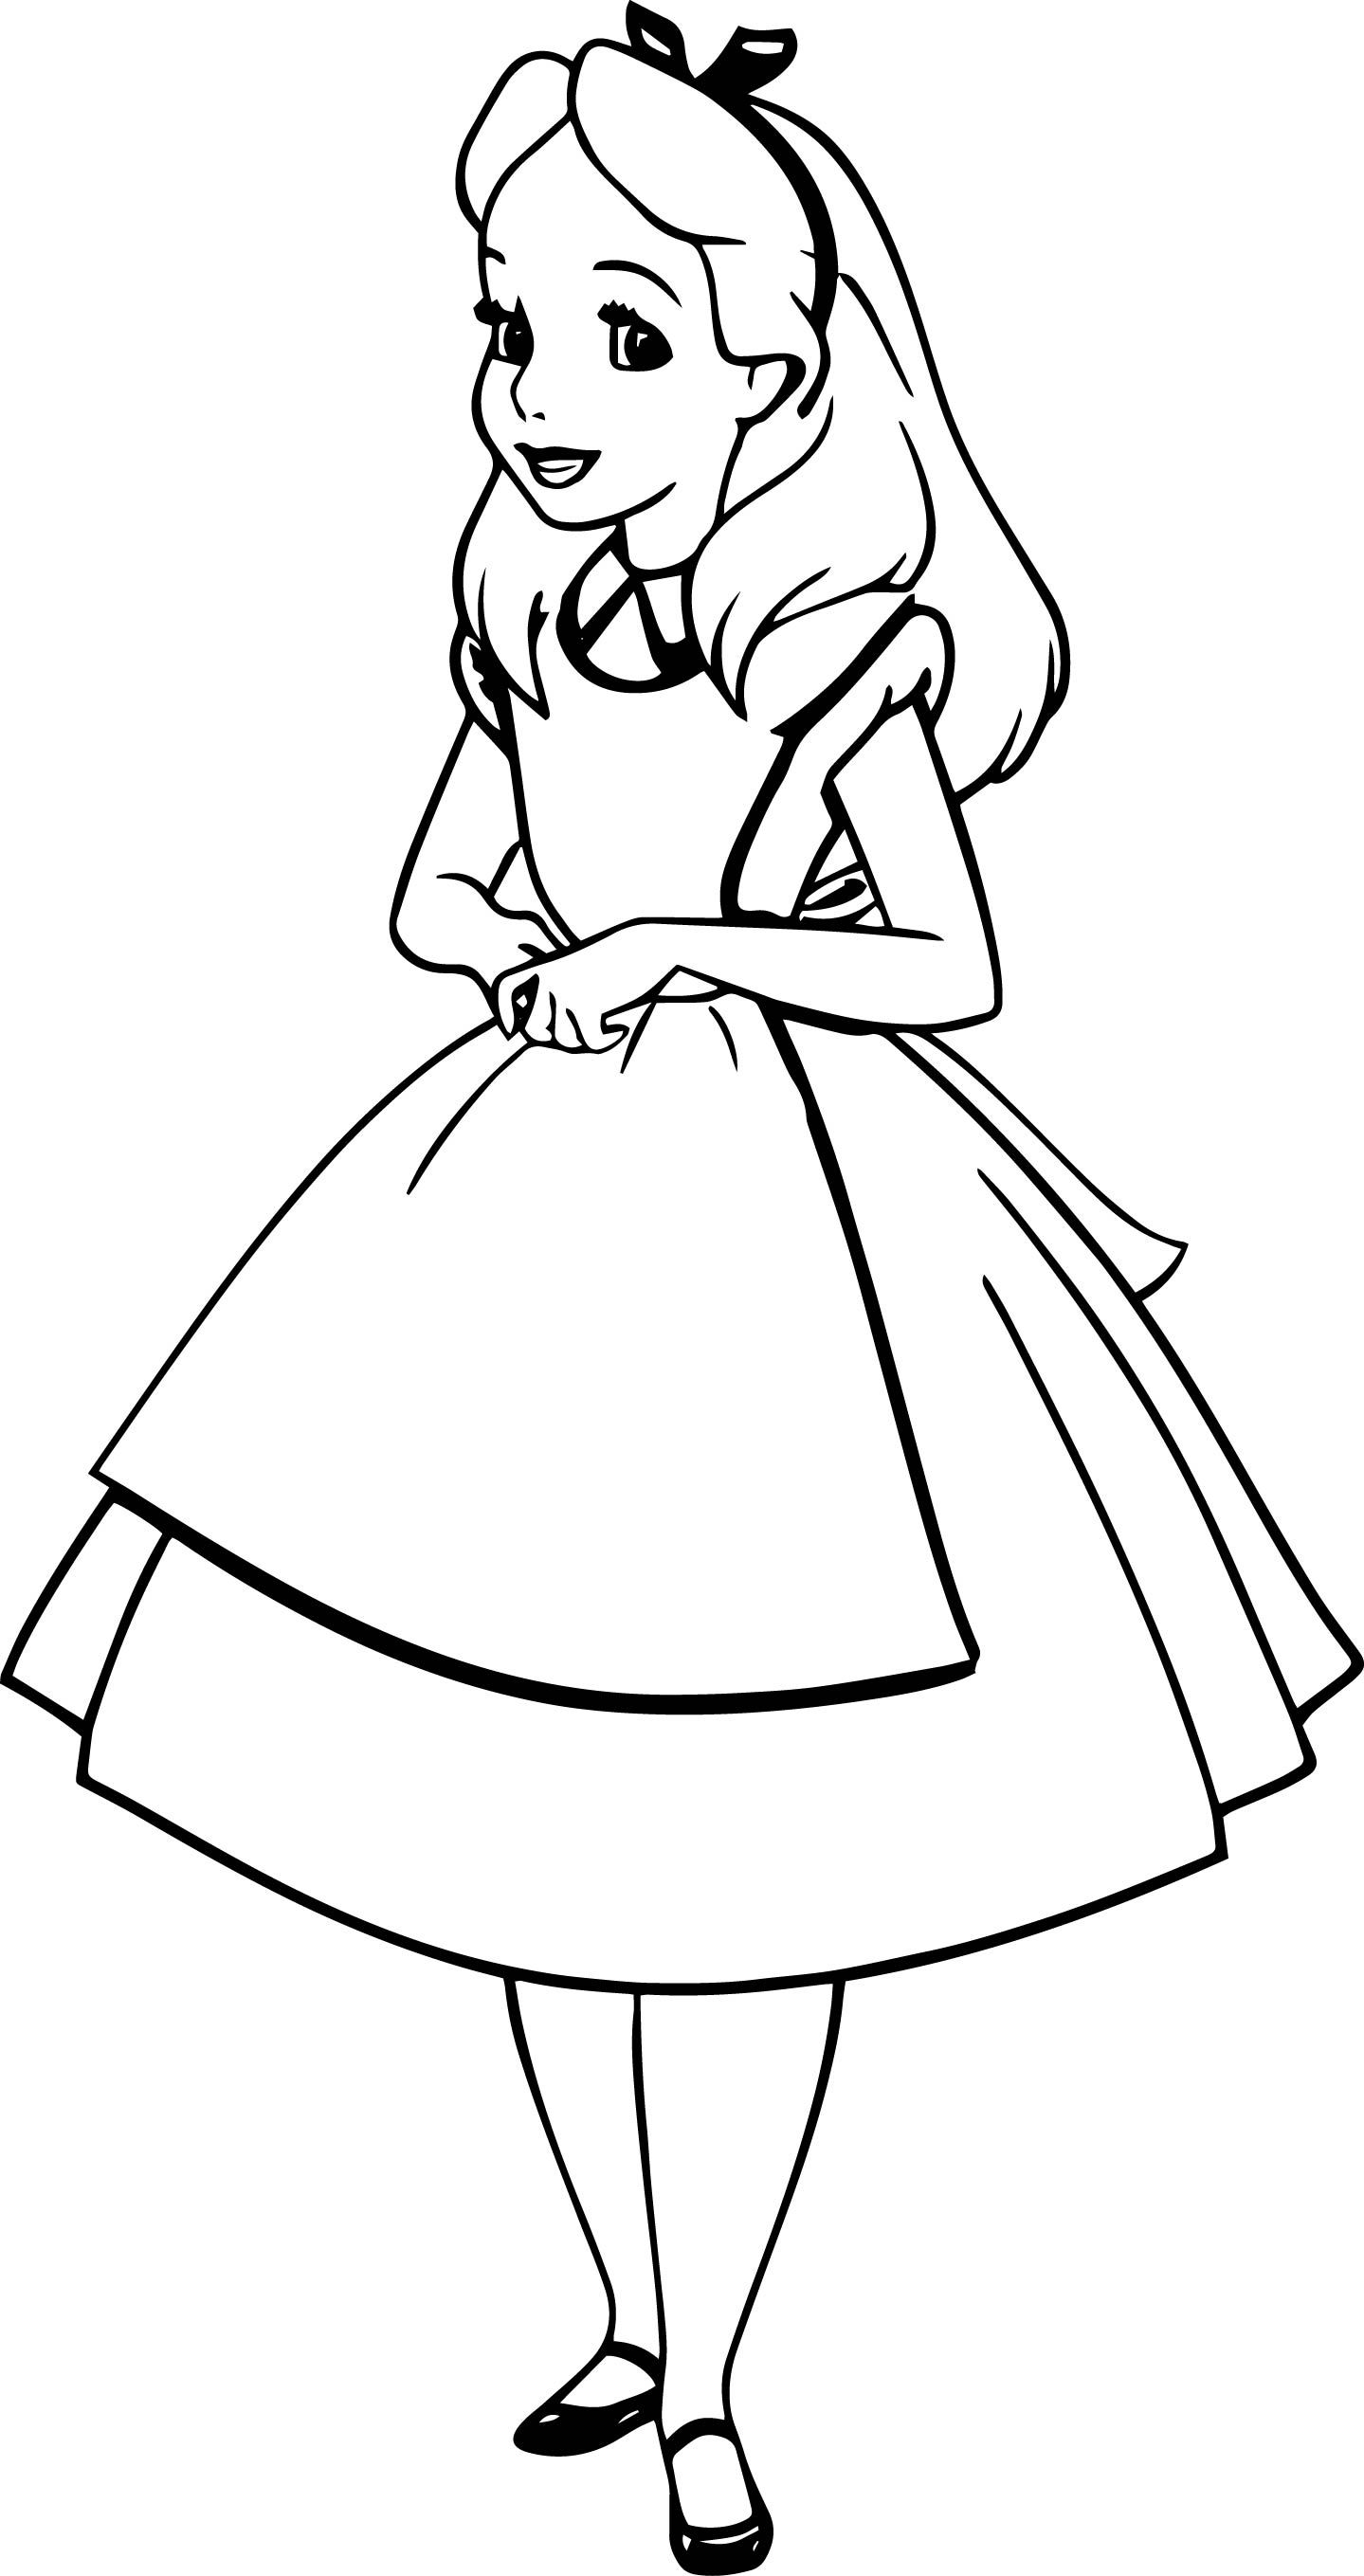 alice in wonderland coloring page dinokidsorg. a march hare. alice ...